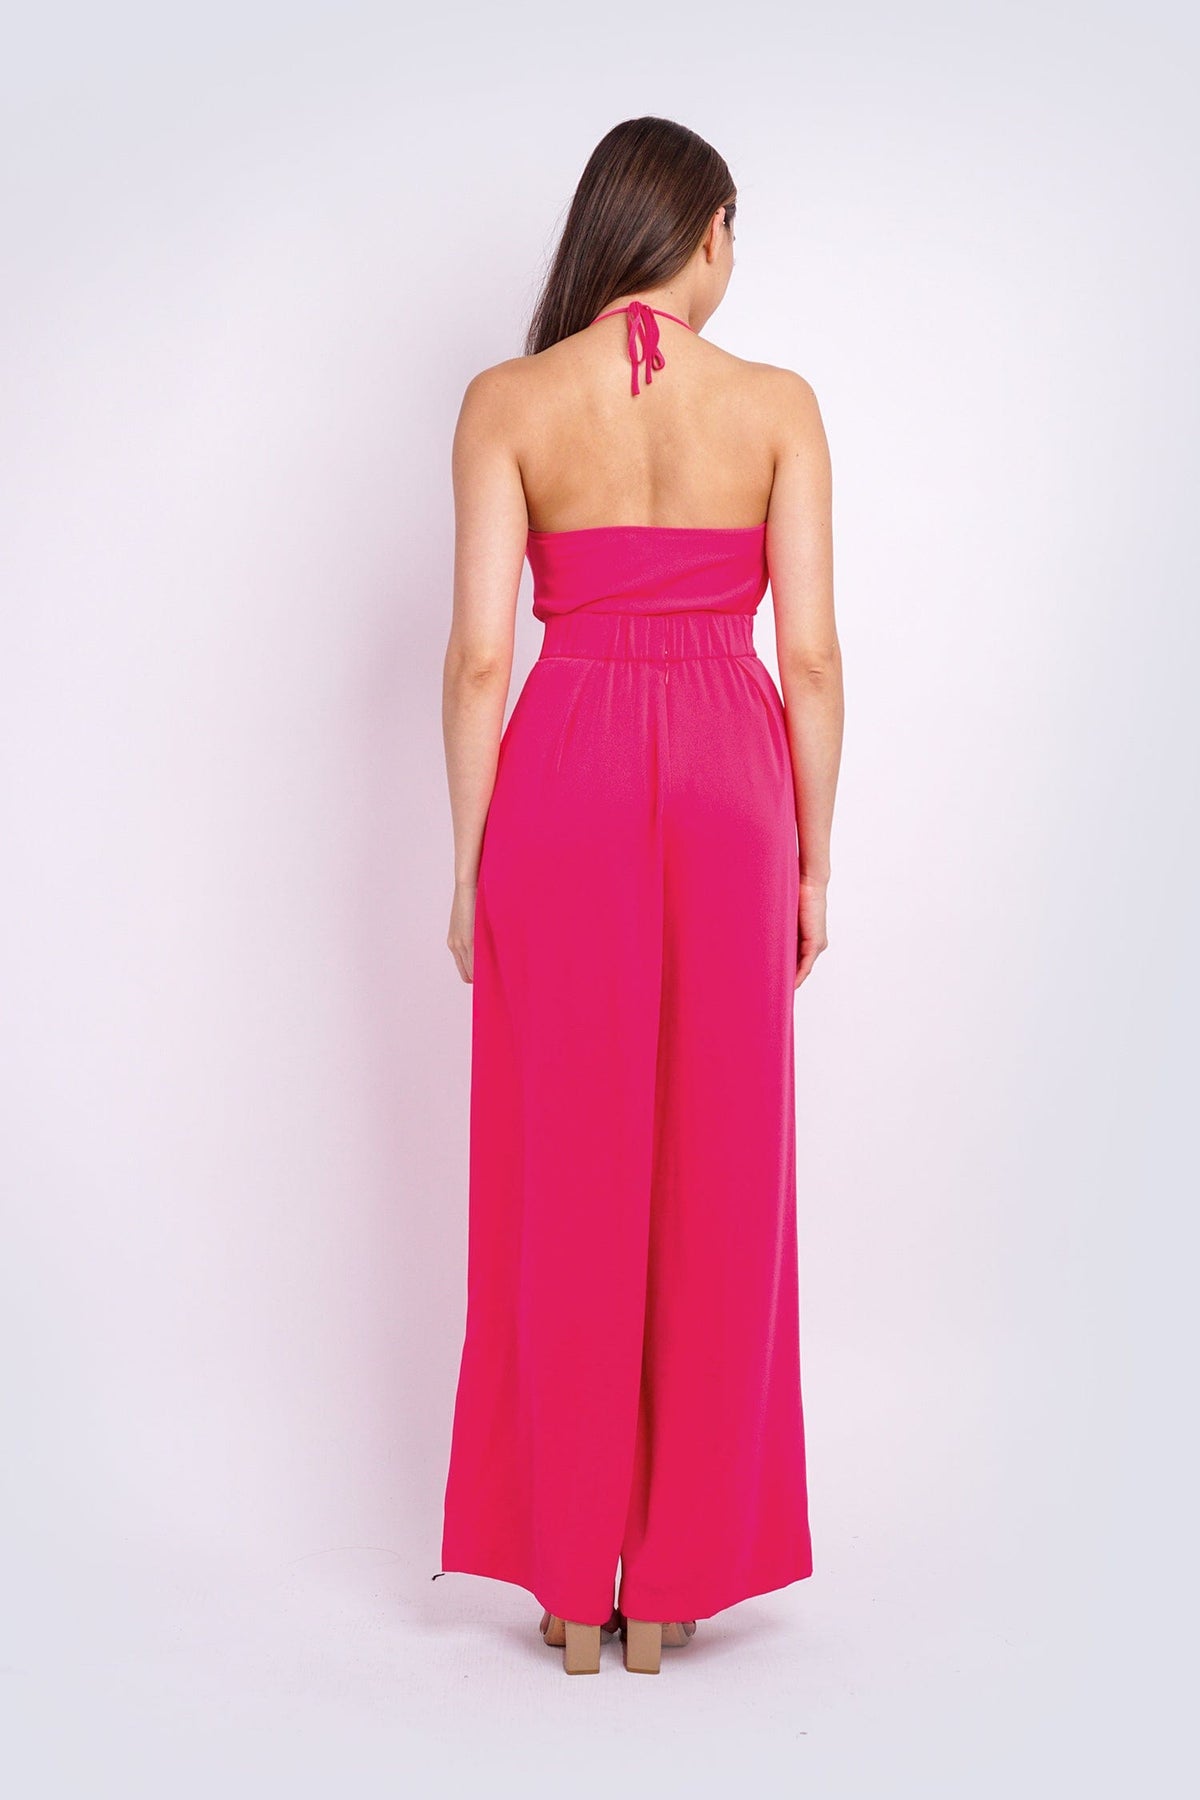 Chloe Dao BOTTOMS Pink Pleated High Waist Relaxing Leslie Pants